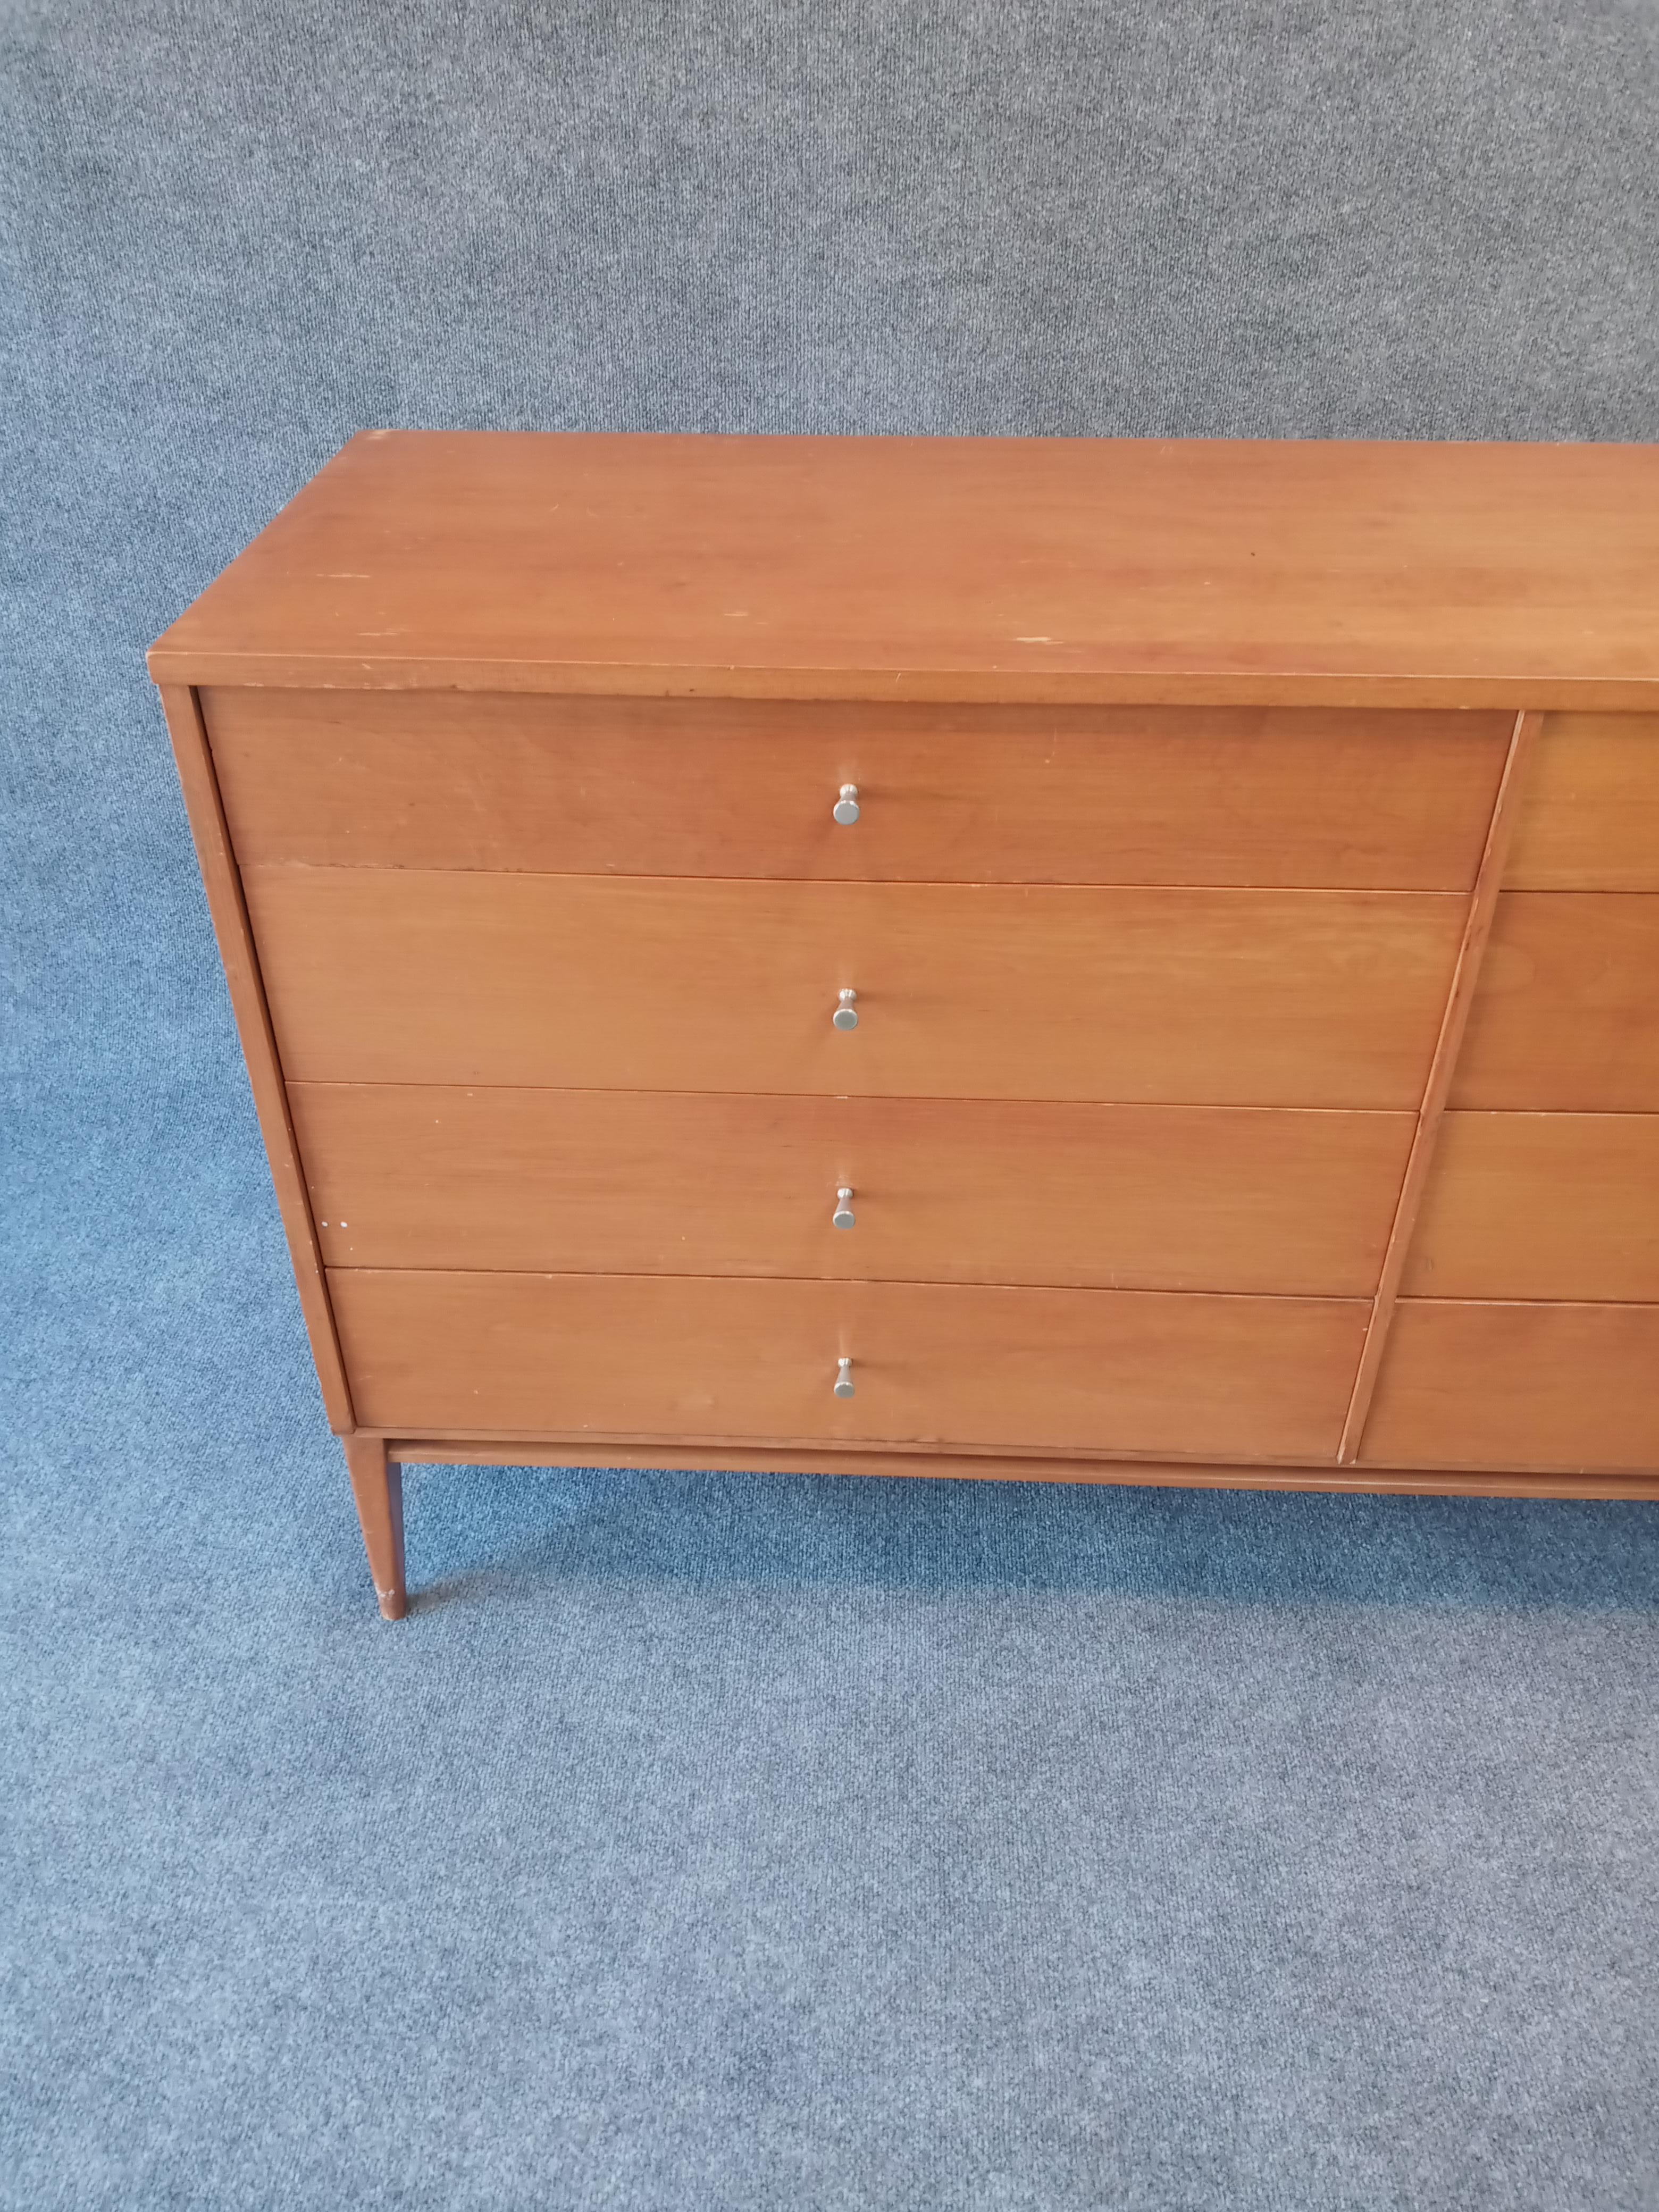 A very practical Paul McCobb Planner Group for Winchendon solid maple 8-drawer dresser with original finish intact. All drawers work well, with clean interiors. No breaks or repairs. Original finish shows age-appropriate scuffs, scratches, and minor